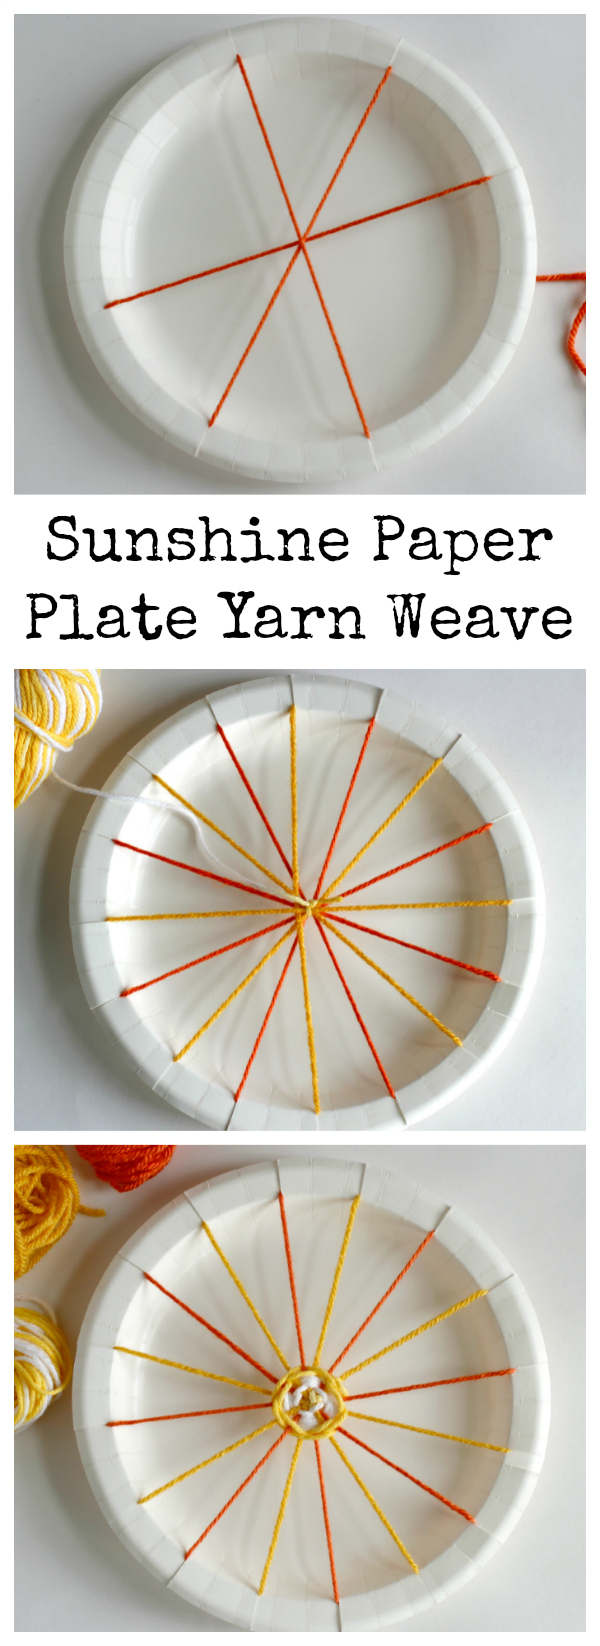 How To Sunshine Paper Plate Yarn Weave